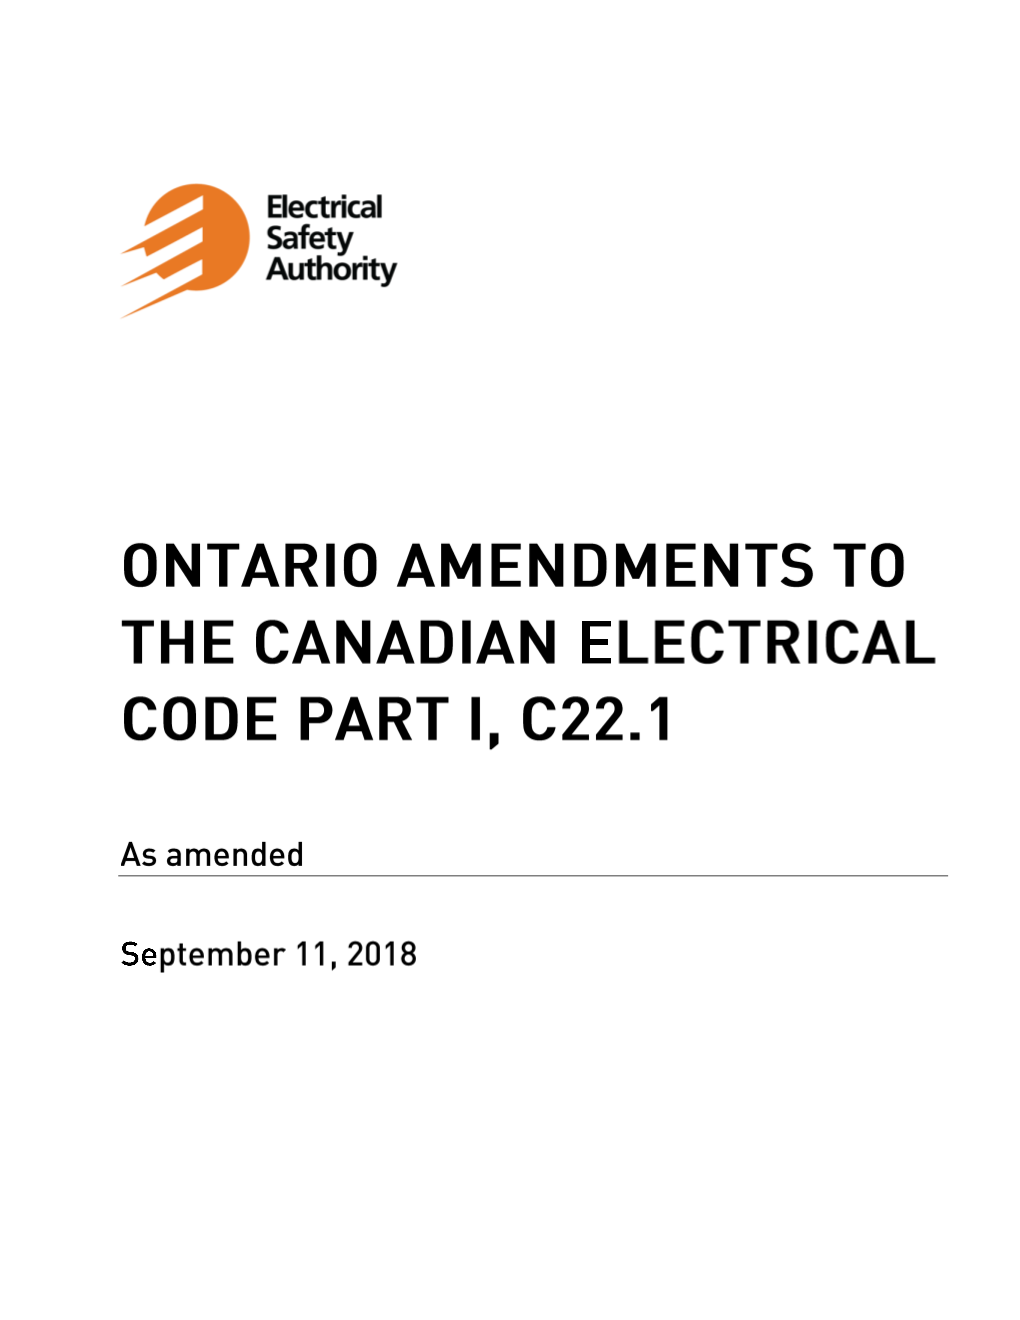 Amendments to the Canadian Electrical Code Part I, C22.1